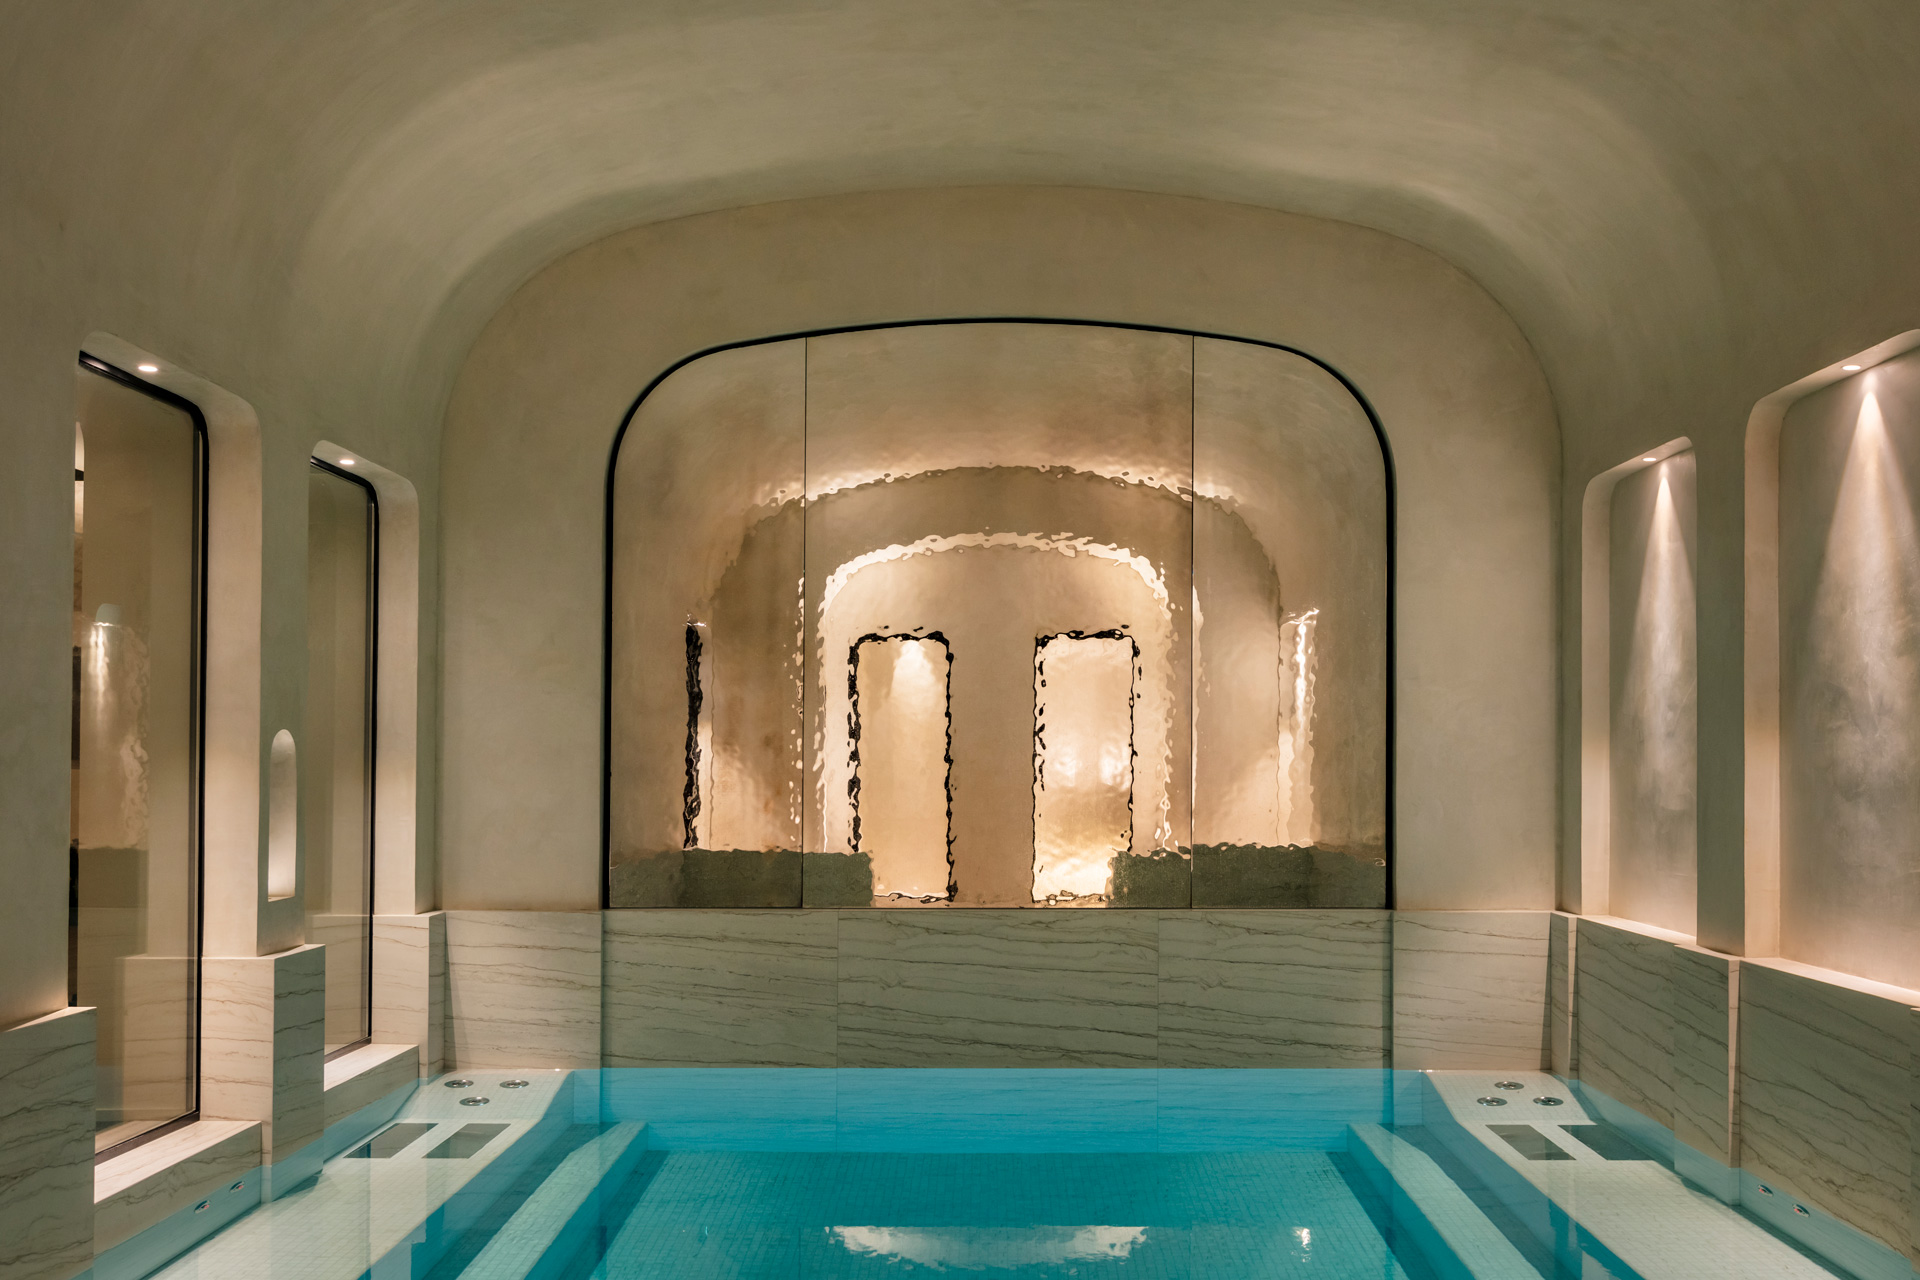 Spa at Pavillon Faubourg Saint Germain hotel, with cream concrete walls and a swimming pool in the centre.